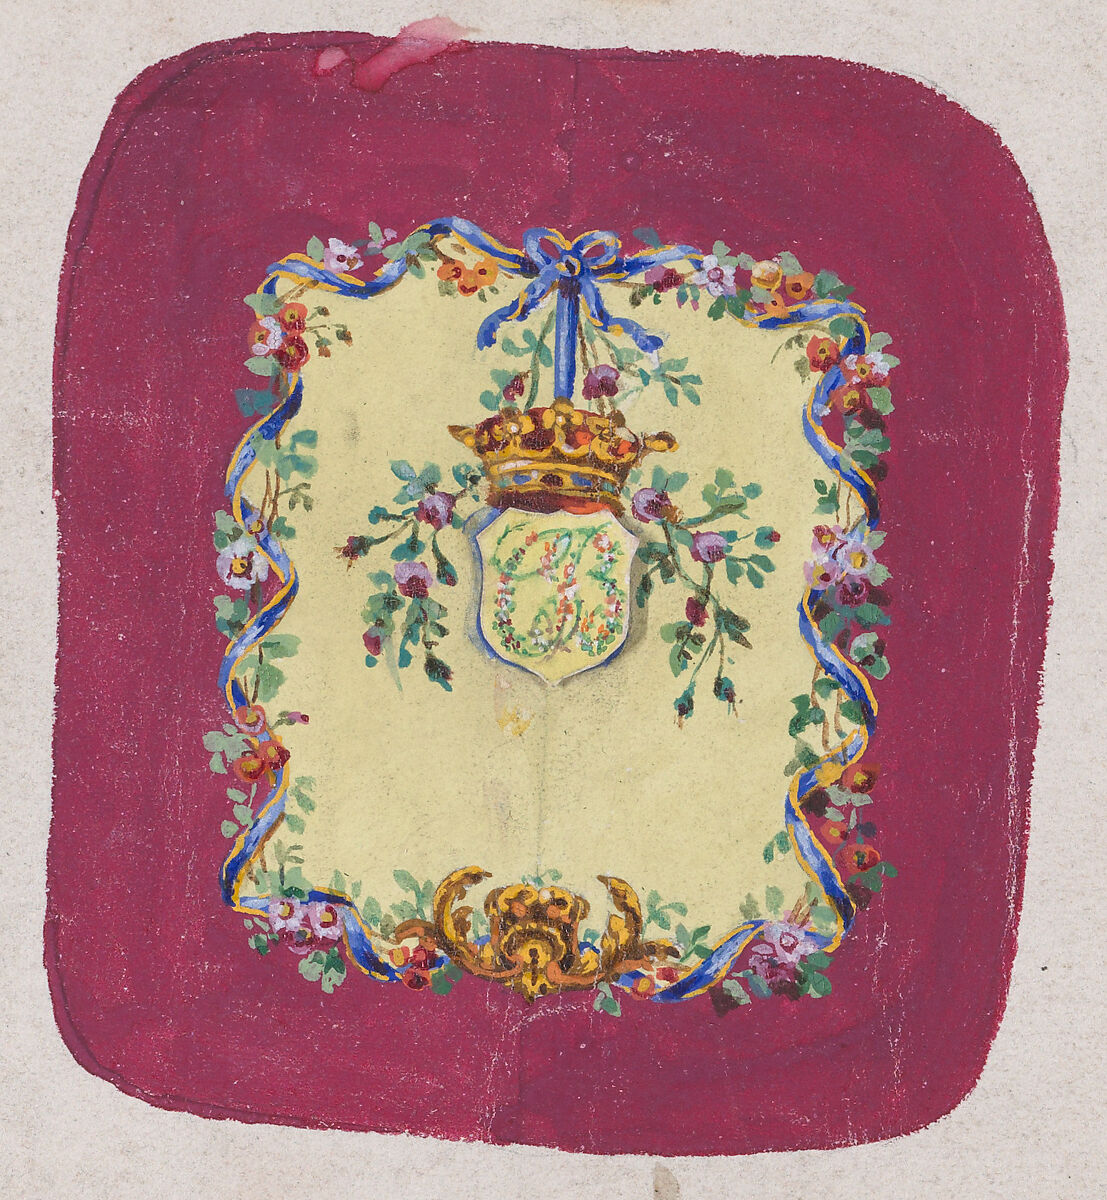 Design for a Chair Back Cover with an Ornamental Frame Formed by a Garland of Leaves and Flowers with an Interlacing Ribbon that Forms a Bow from which a Crown Motif with Monogram Hangs, Anonymous, French, 19th century, Watercolor 